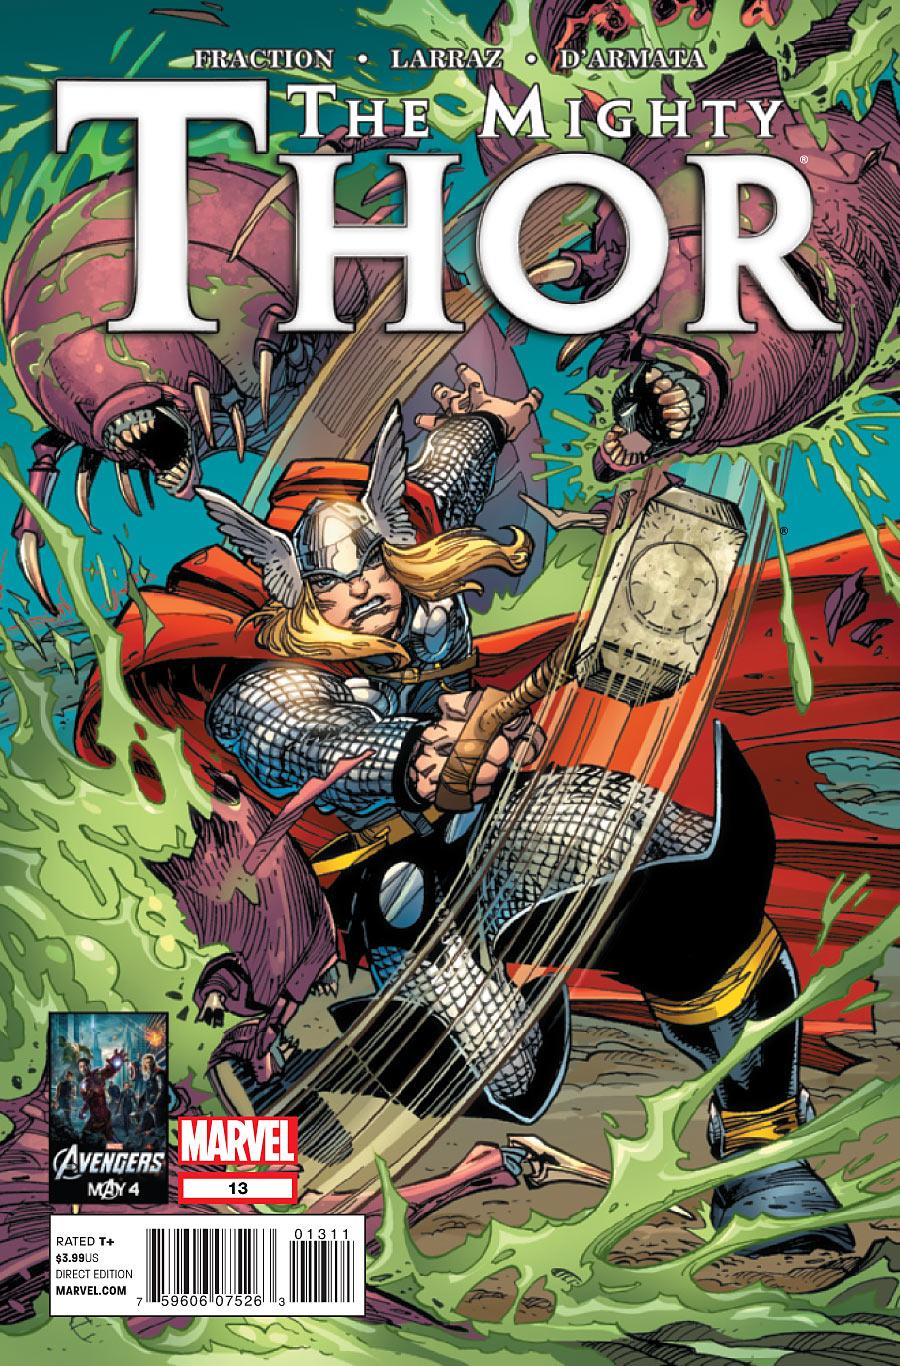 The Mighty Thor Vol. 1 #13